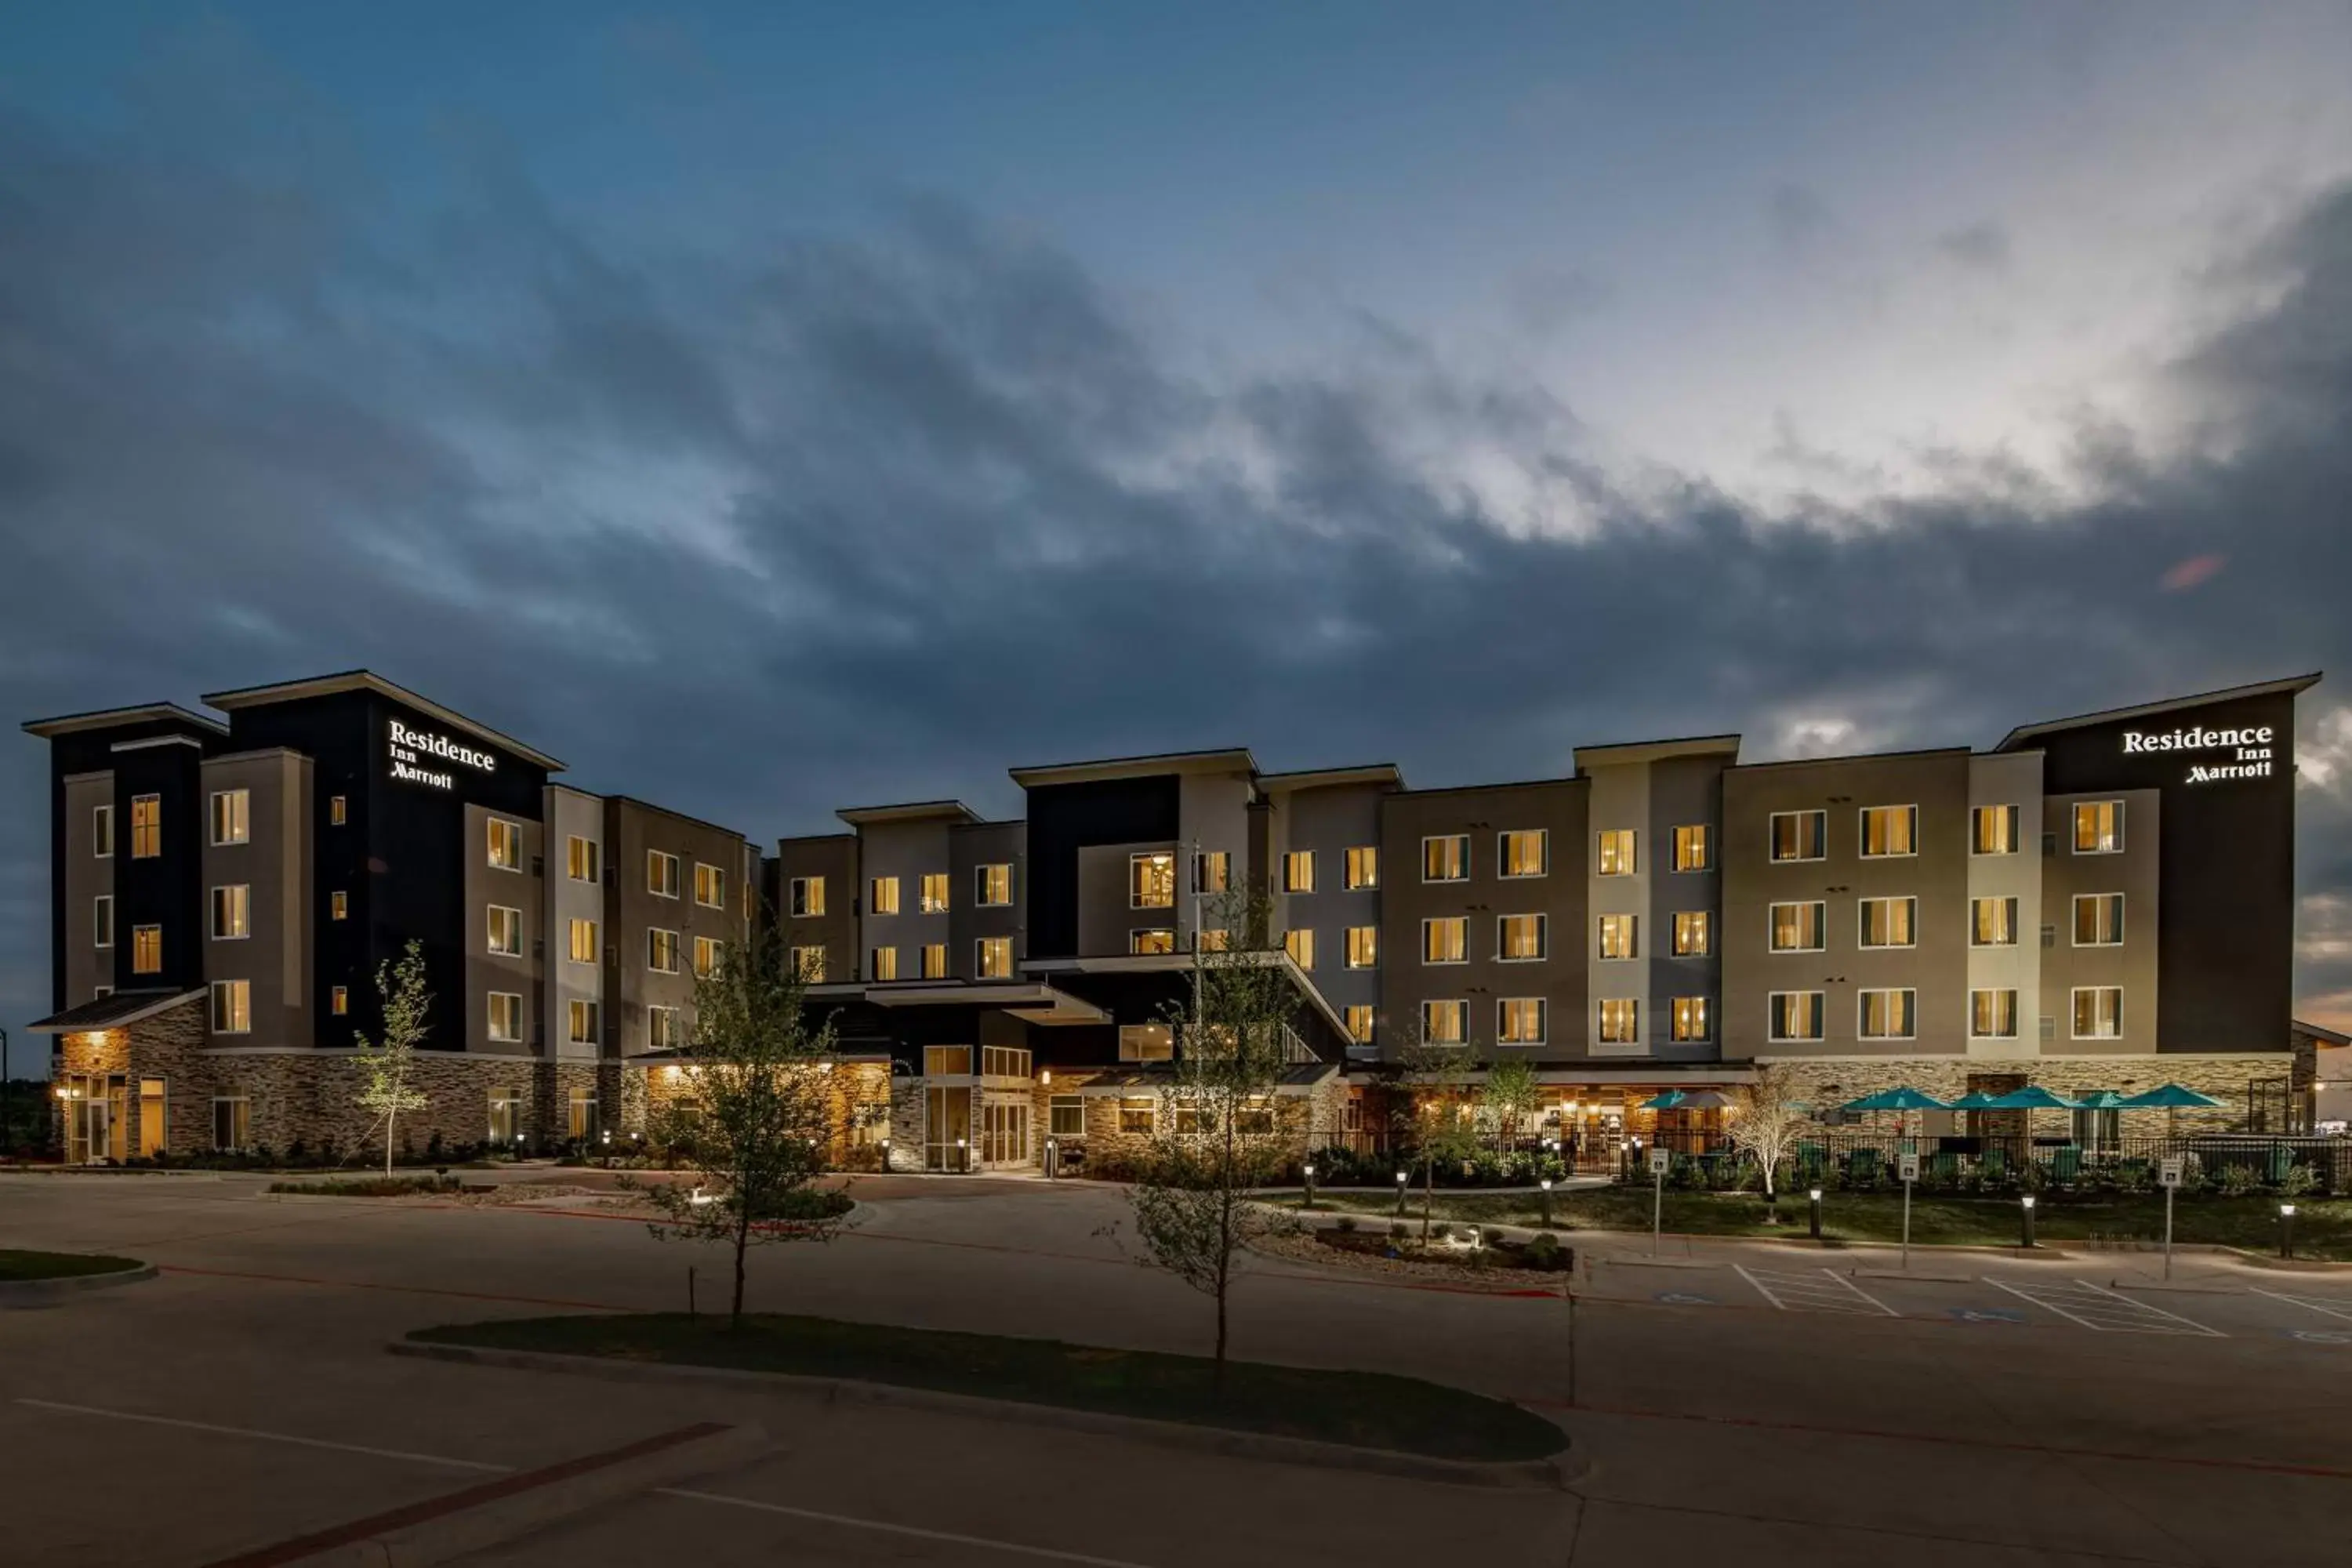 Property Building in Residence Inn by Marriott Dallas at The Canyon